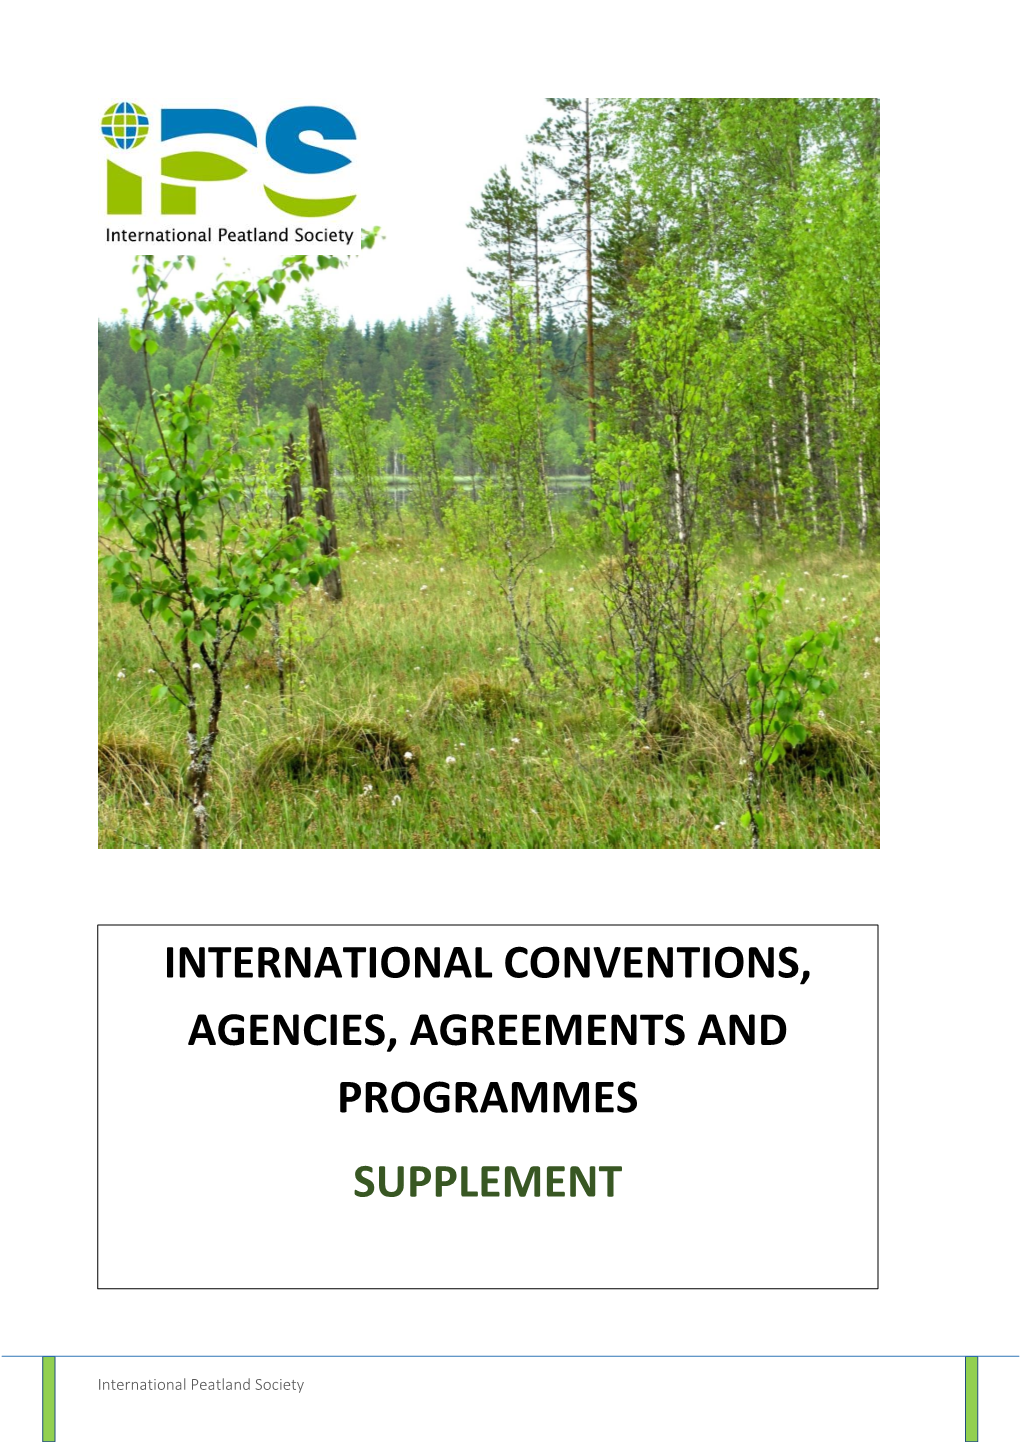 International Conventions, Agencies, Agreements and Programmes Supplement